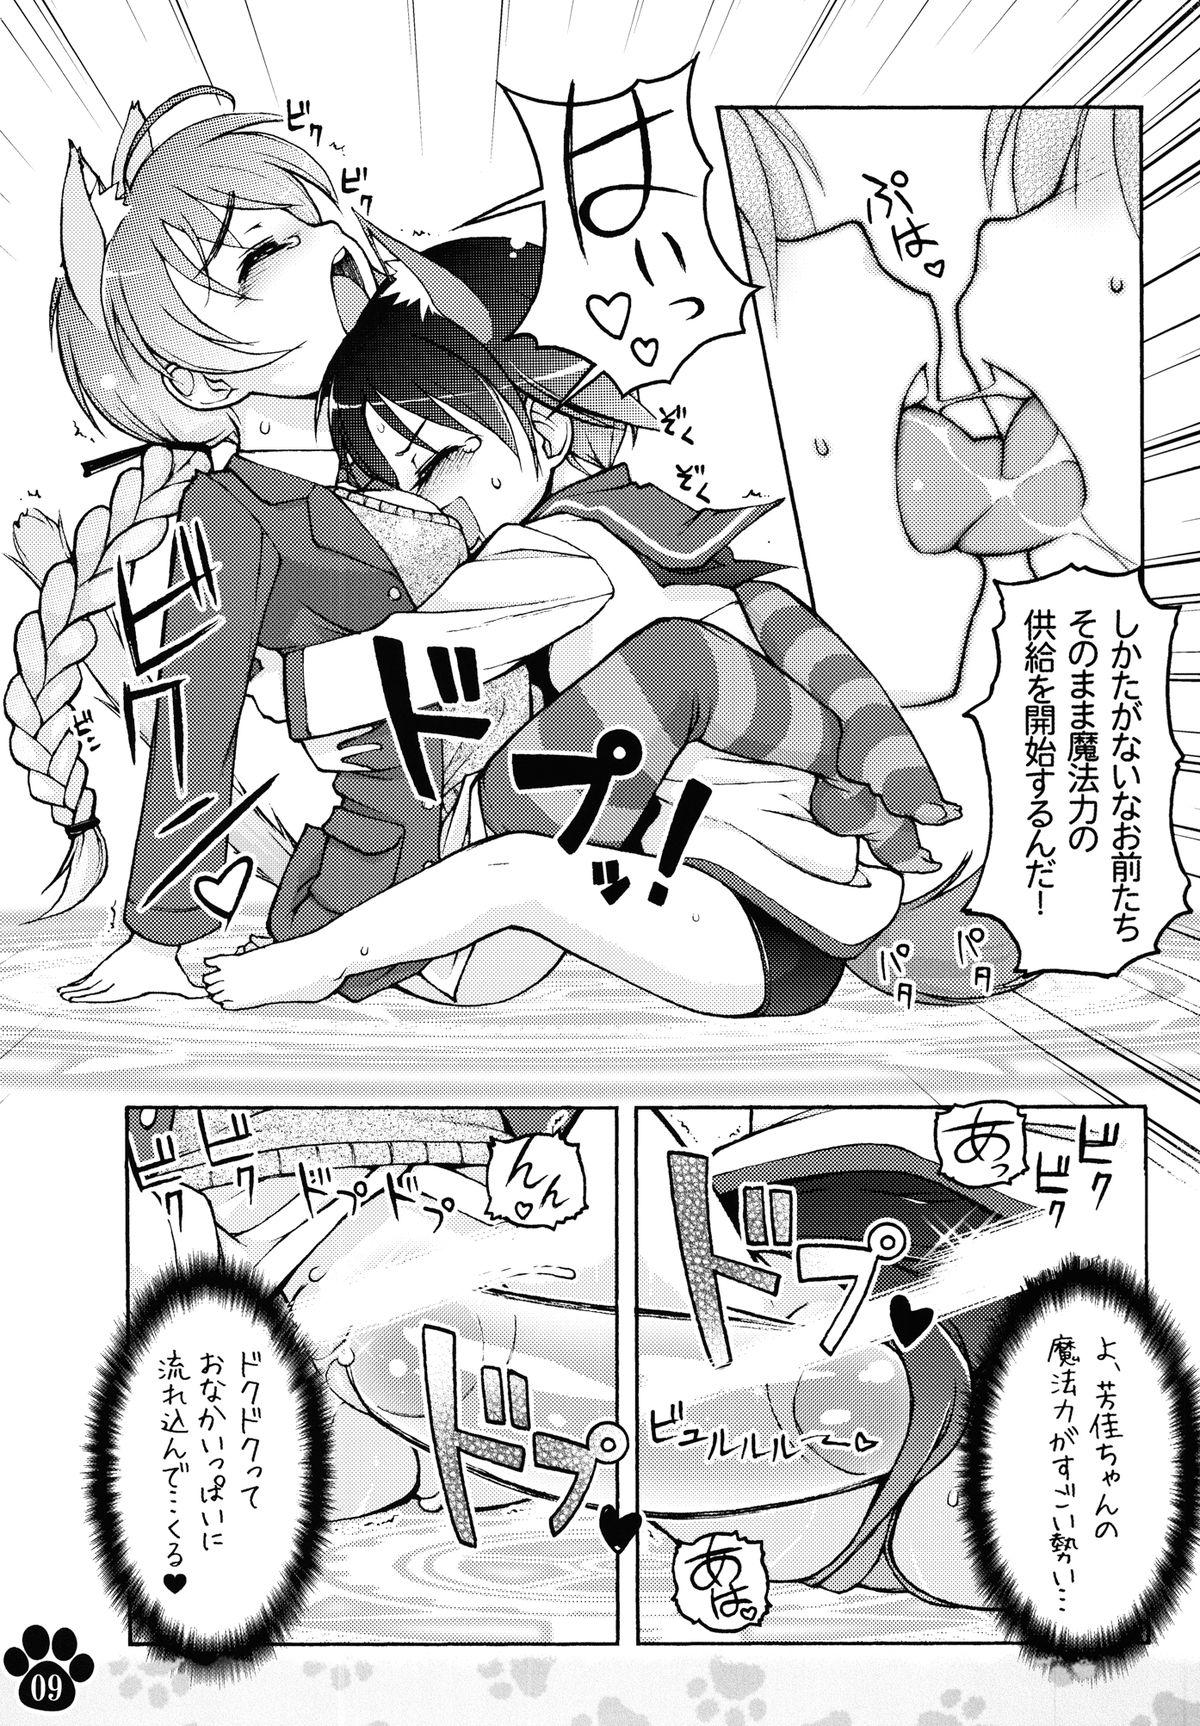 Masterbation Maniawase Witches Plus - Strike witches Clothed Sex - Page 9